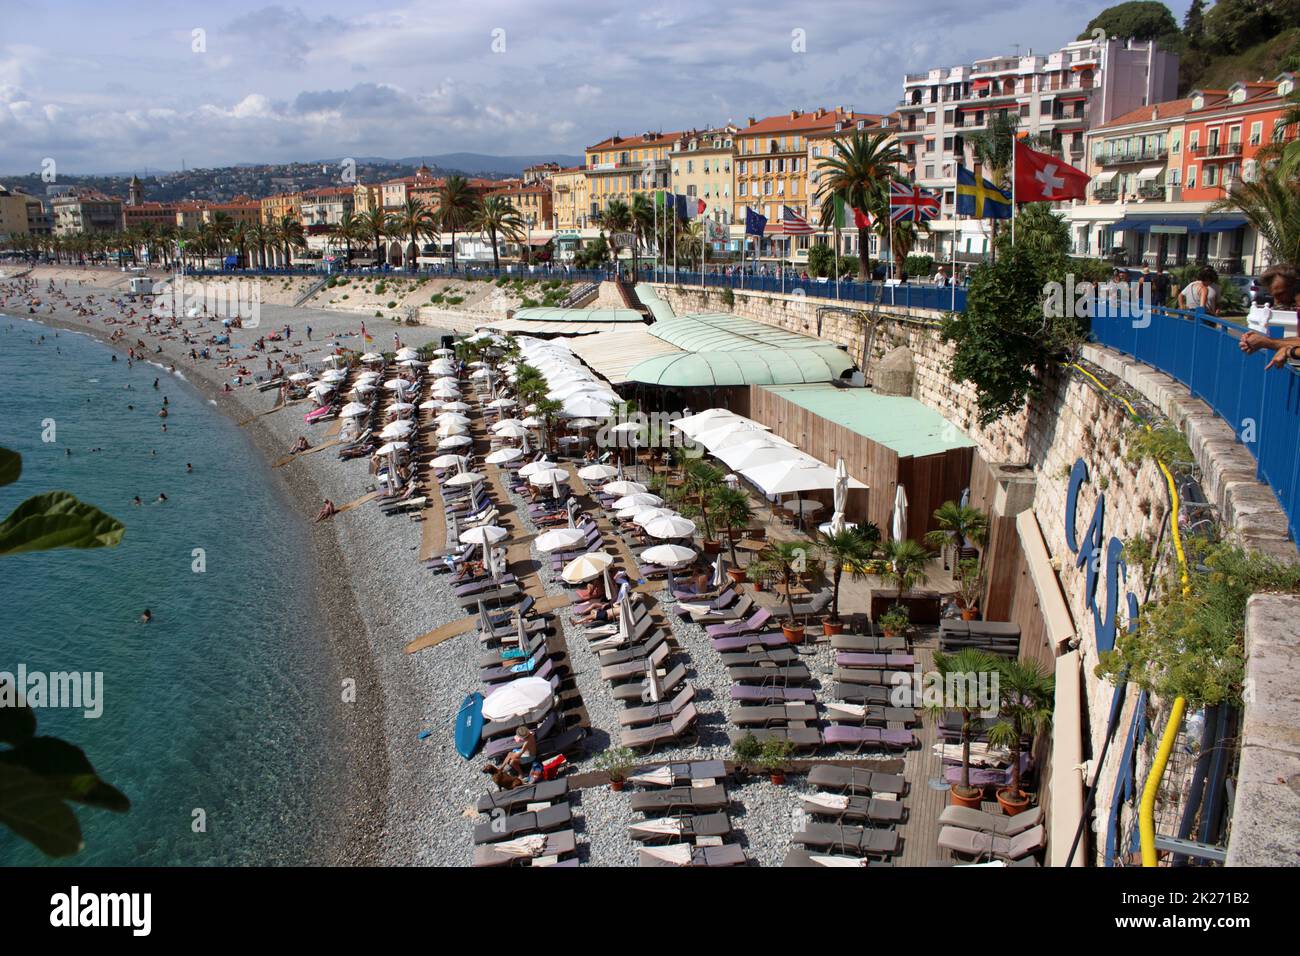 View of the Castel Plage and the Promenade des Anglais located in the beautiful french riviera city of Nice on the Côte d'Azur. Stock Photo